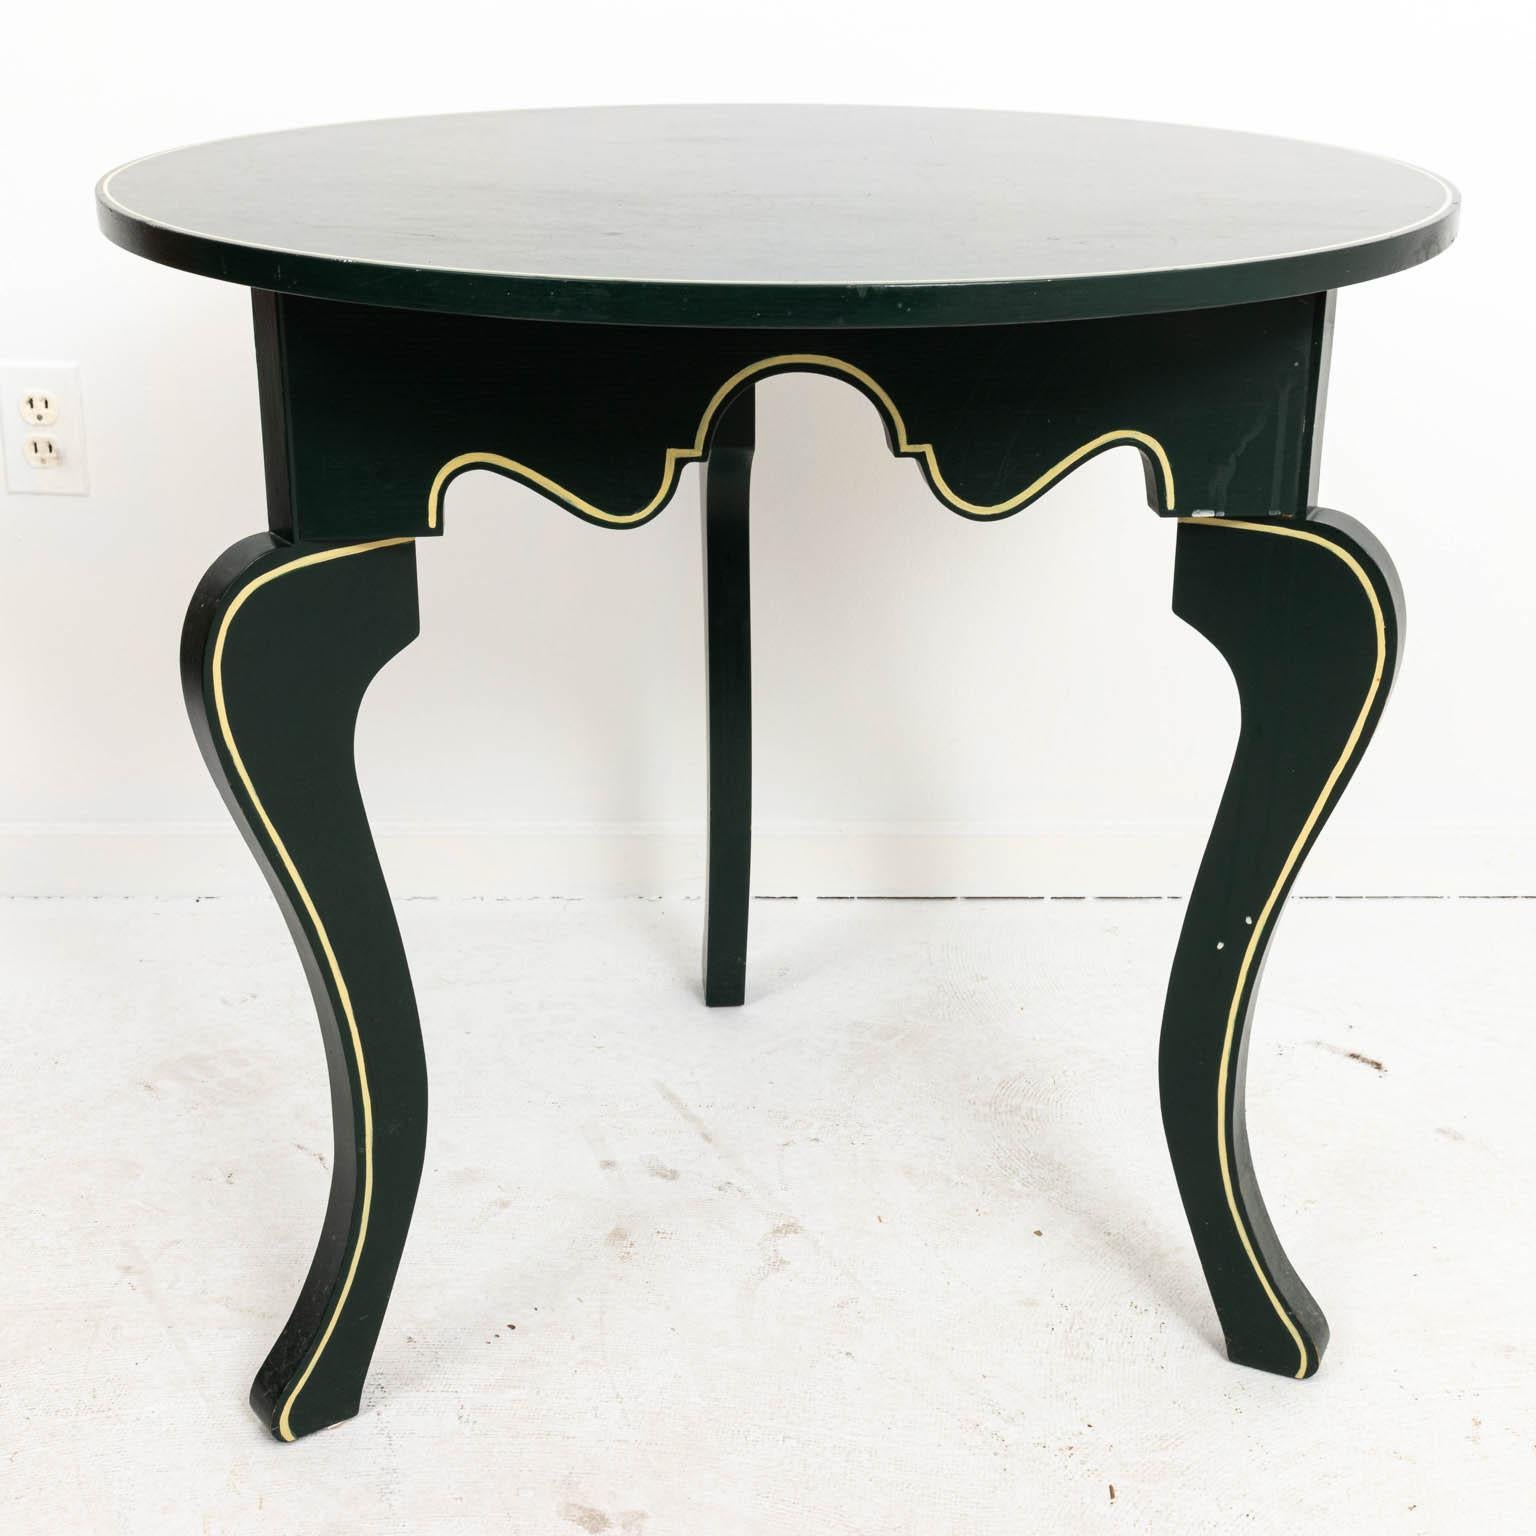 Round green painted table by Sudeley Castle Furniture made for the George Smith showrooms, circa 1980s. Made in England. Please note of wear consistent with aged uses, minor wear to paint.